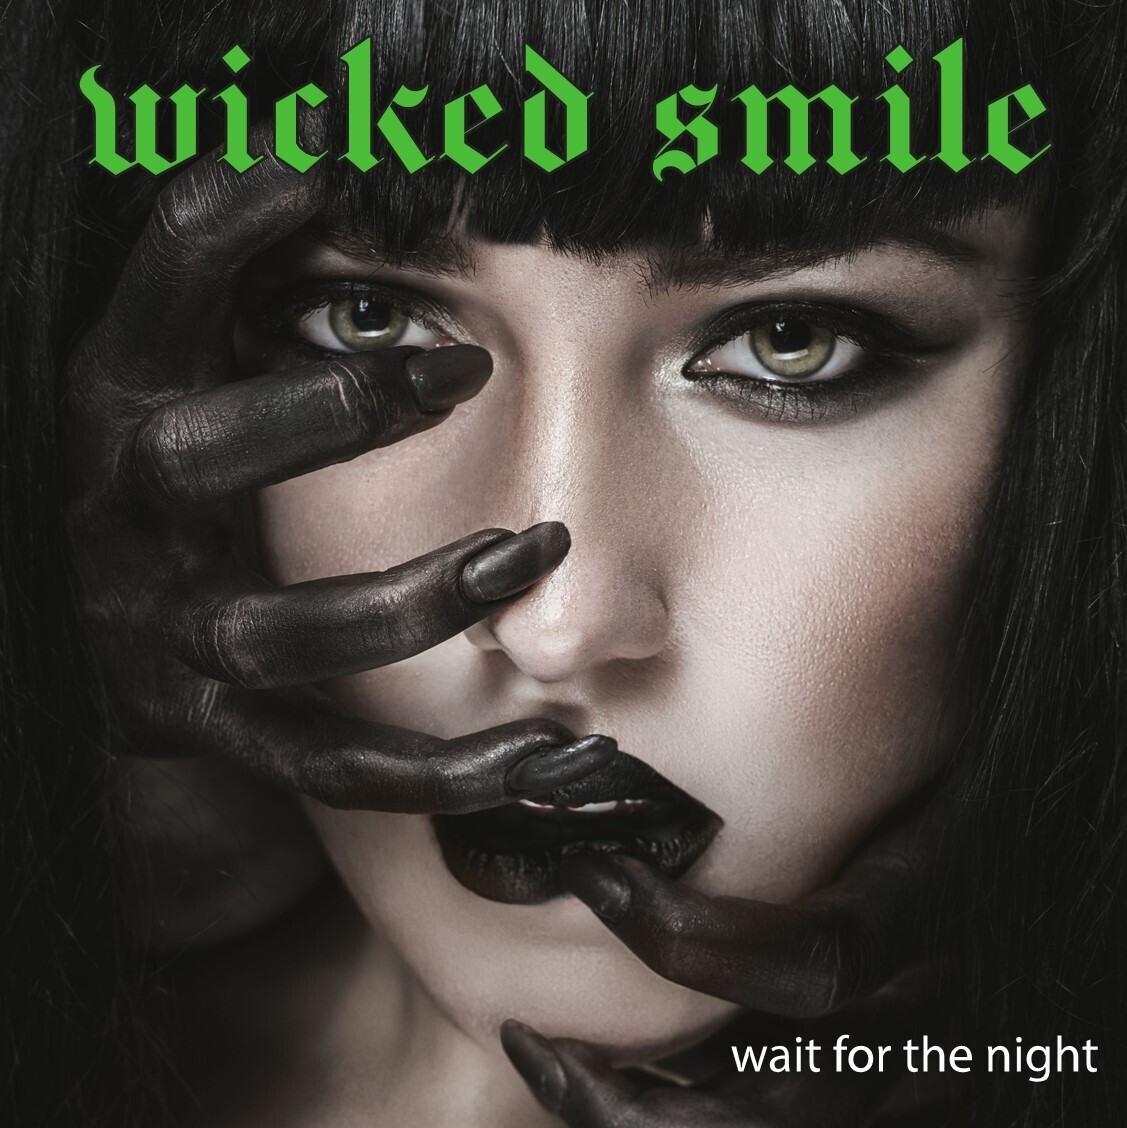 Wicked Smile - Wait For The Night cd (INTERNATIONAL ORDERS ONLY)